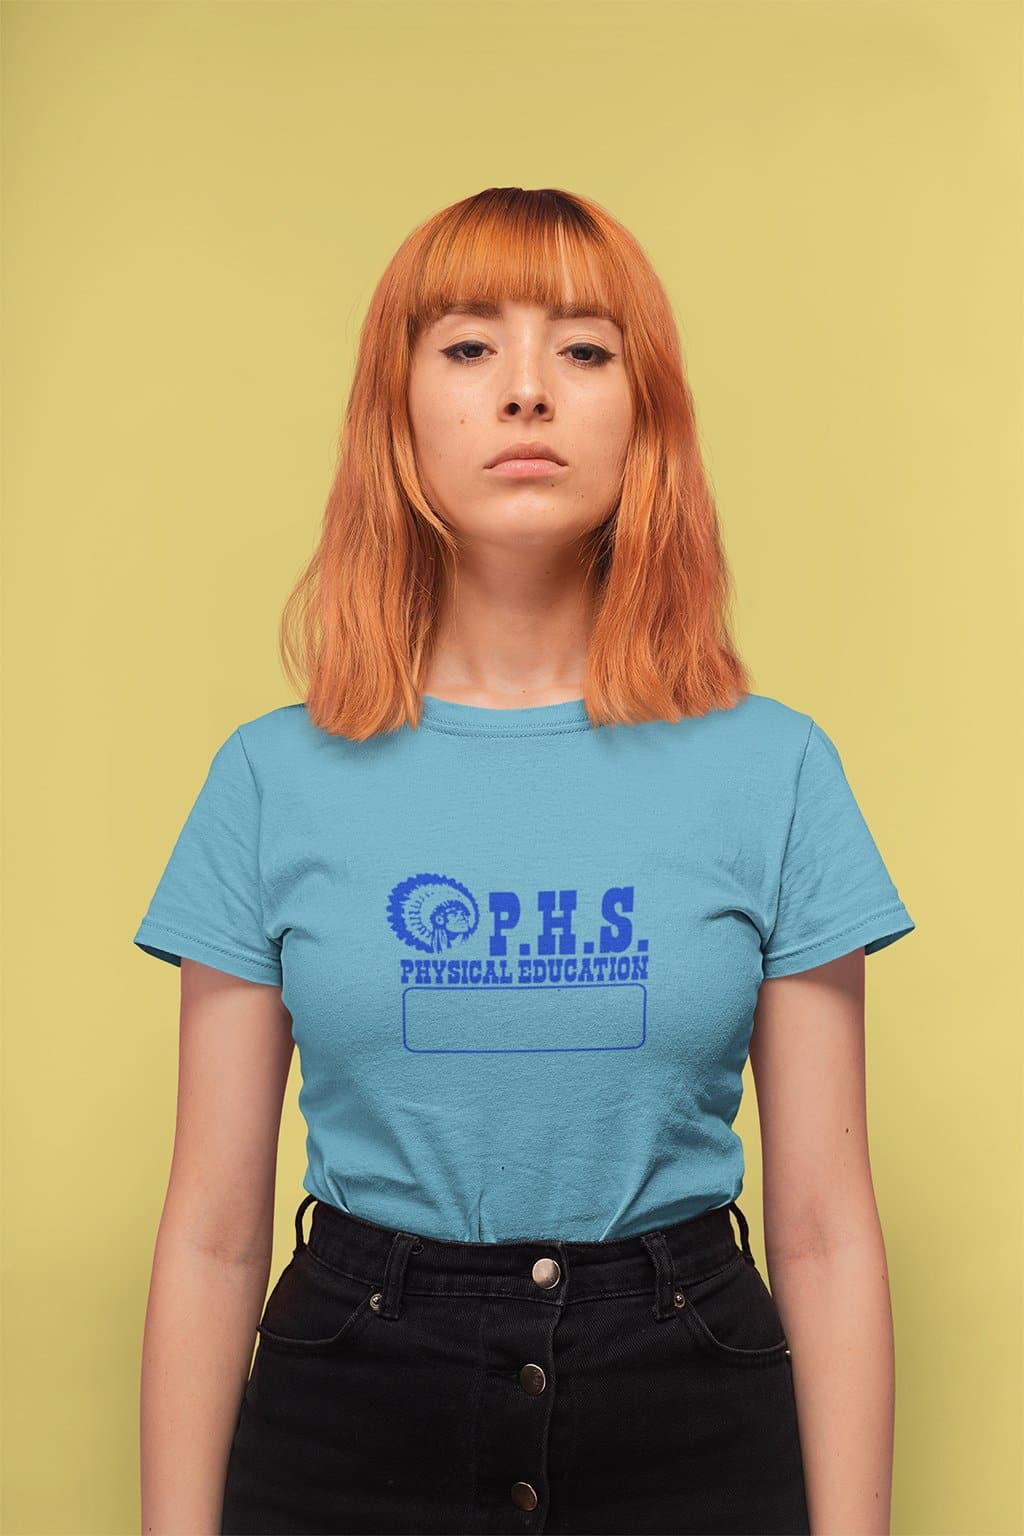 Dynamite Duds Napoleon Dynamite PHS physical education gym t-shirt woman